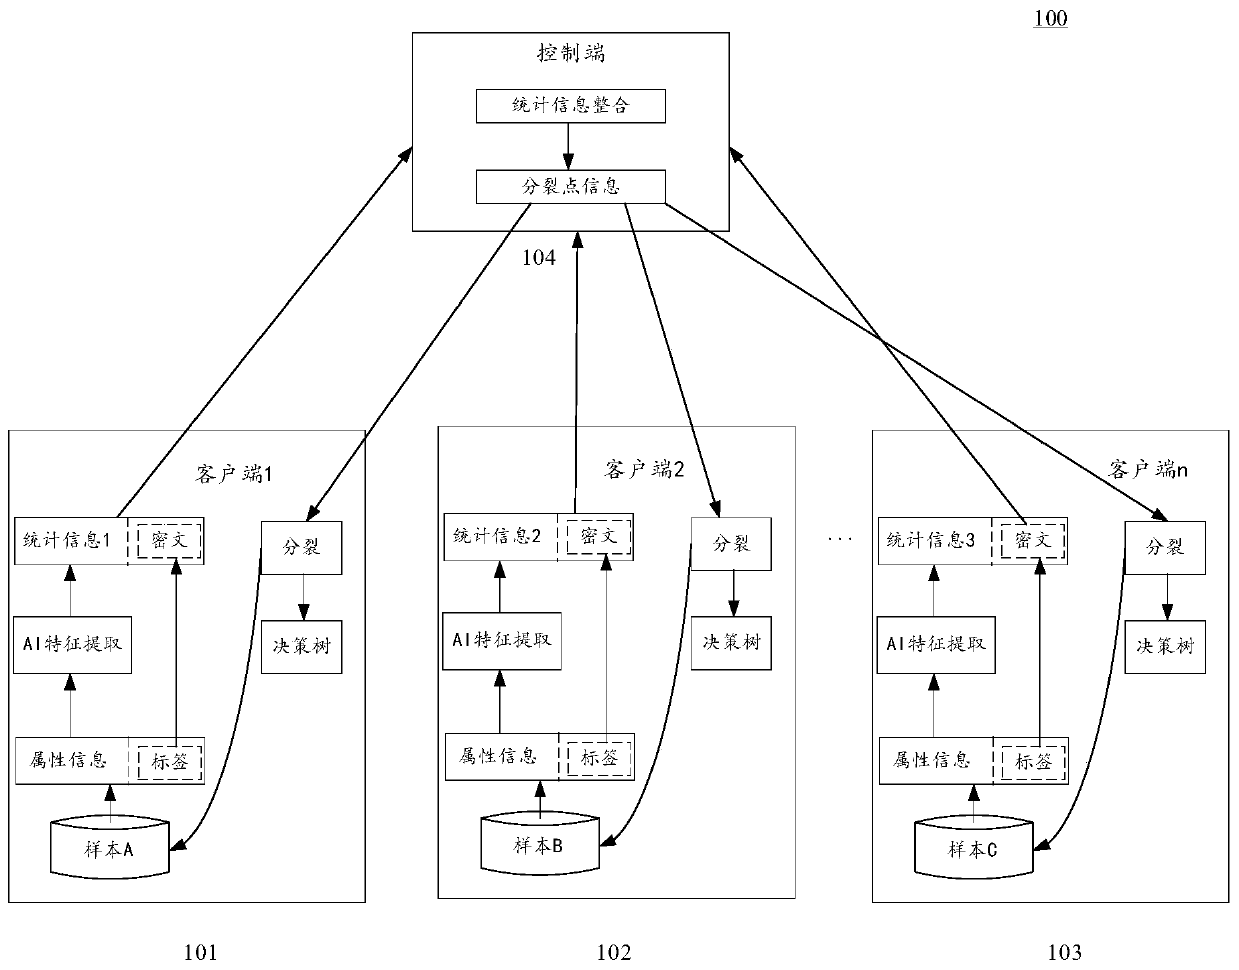 Method and device for constructing decision tree